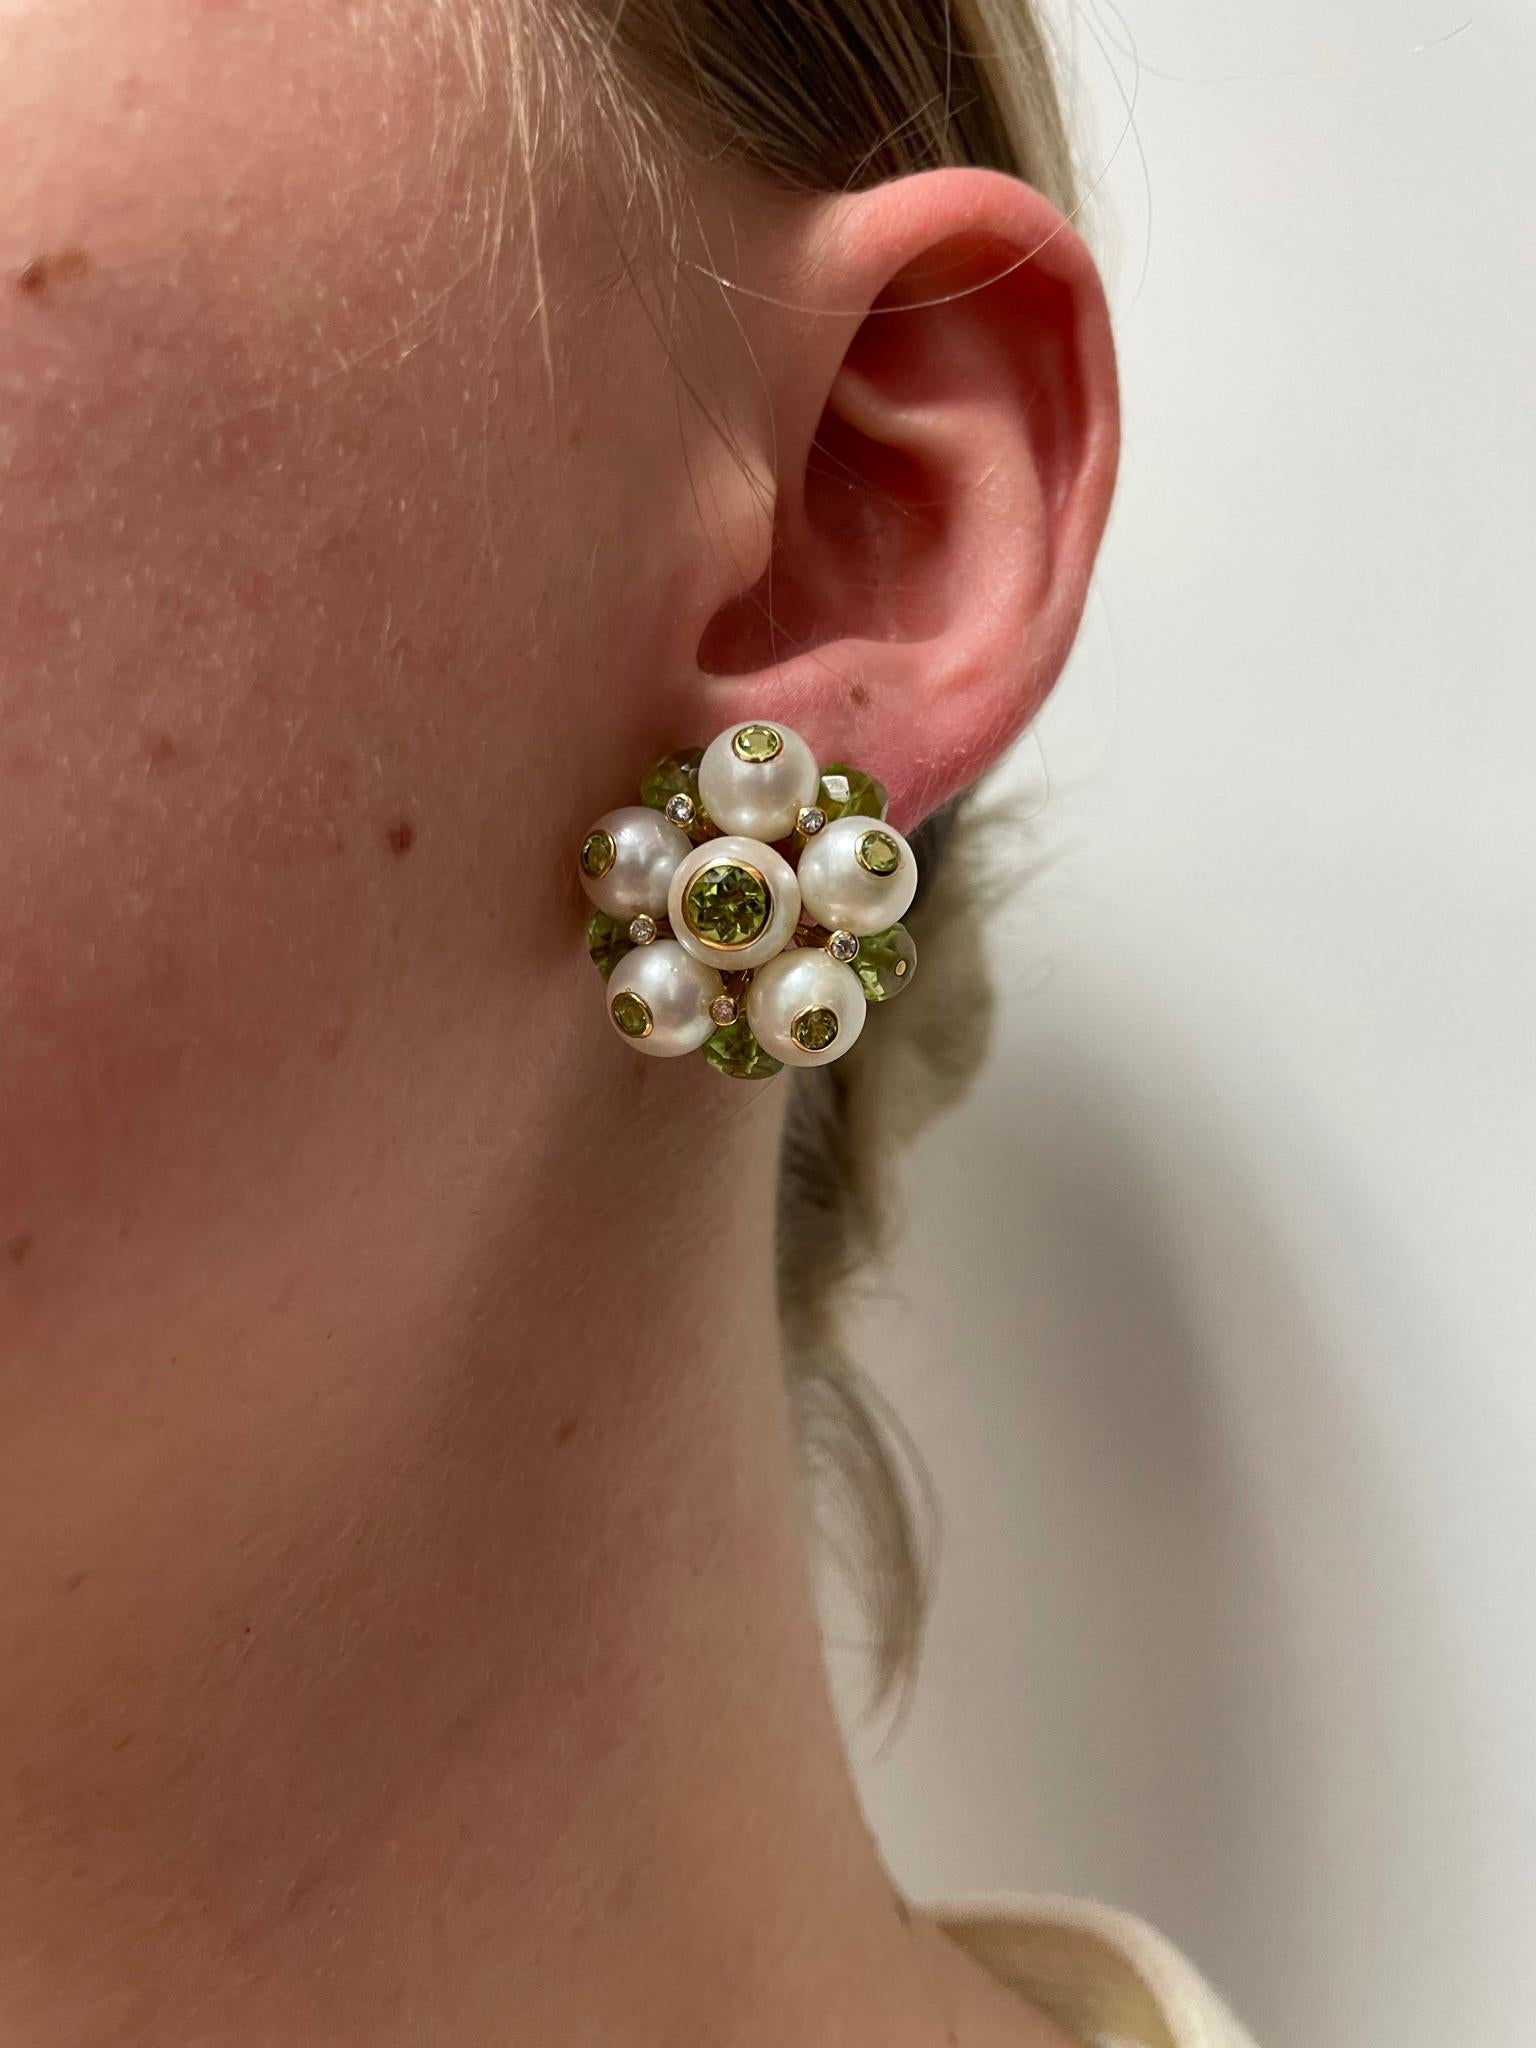 A pair of Cultured Pearl, Diamond, and Peridot Earrings, made in 18k Gold by Trianon. The earrings measure 1 inch x 1 inch. The diamonds weigh approximately 0.20 carats. 